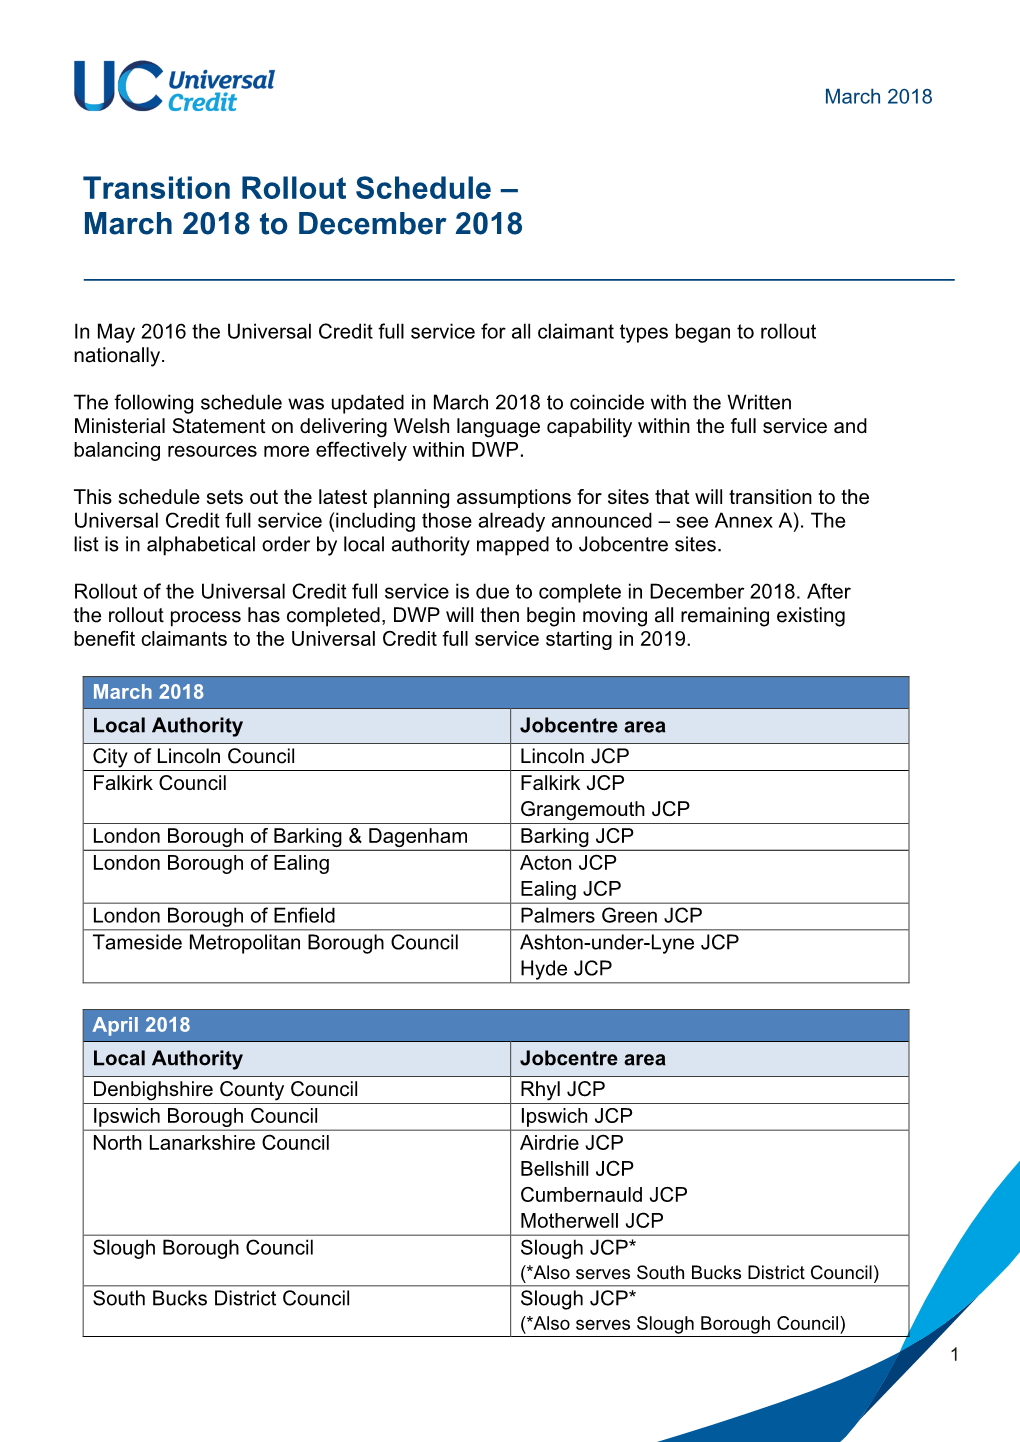 Universal Credit Transition Rollout Schedule